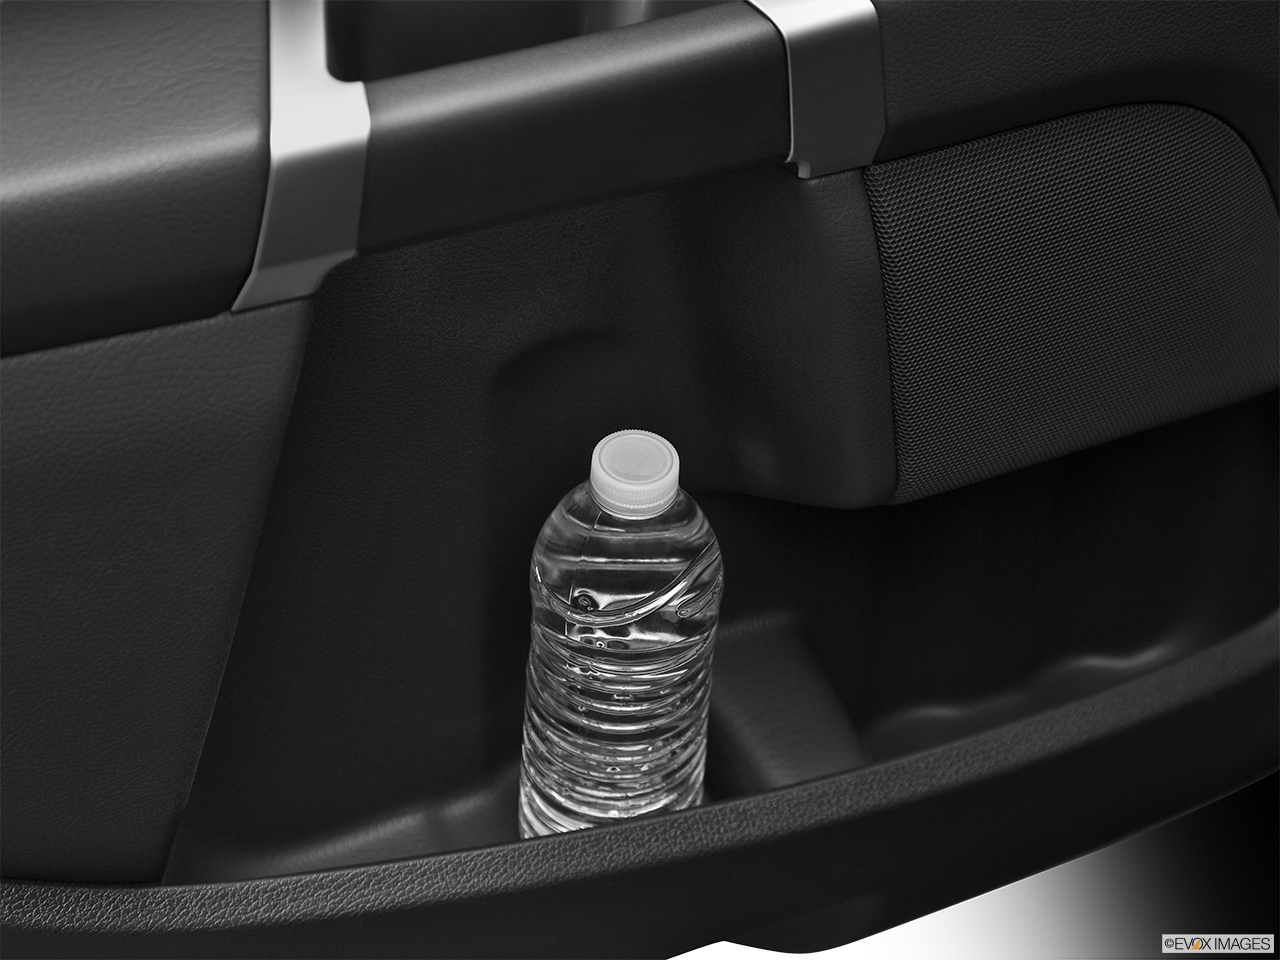 2014 Volvo XC90 Base Second row side cup holder with coffee prop, or second row door cup holder with water bottle. 